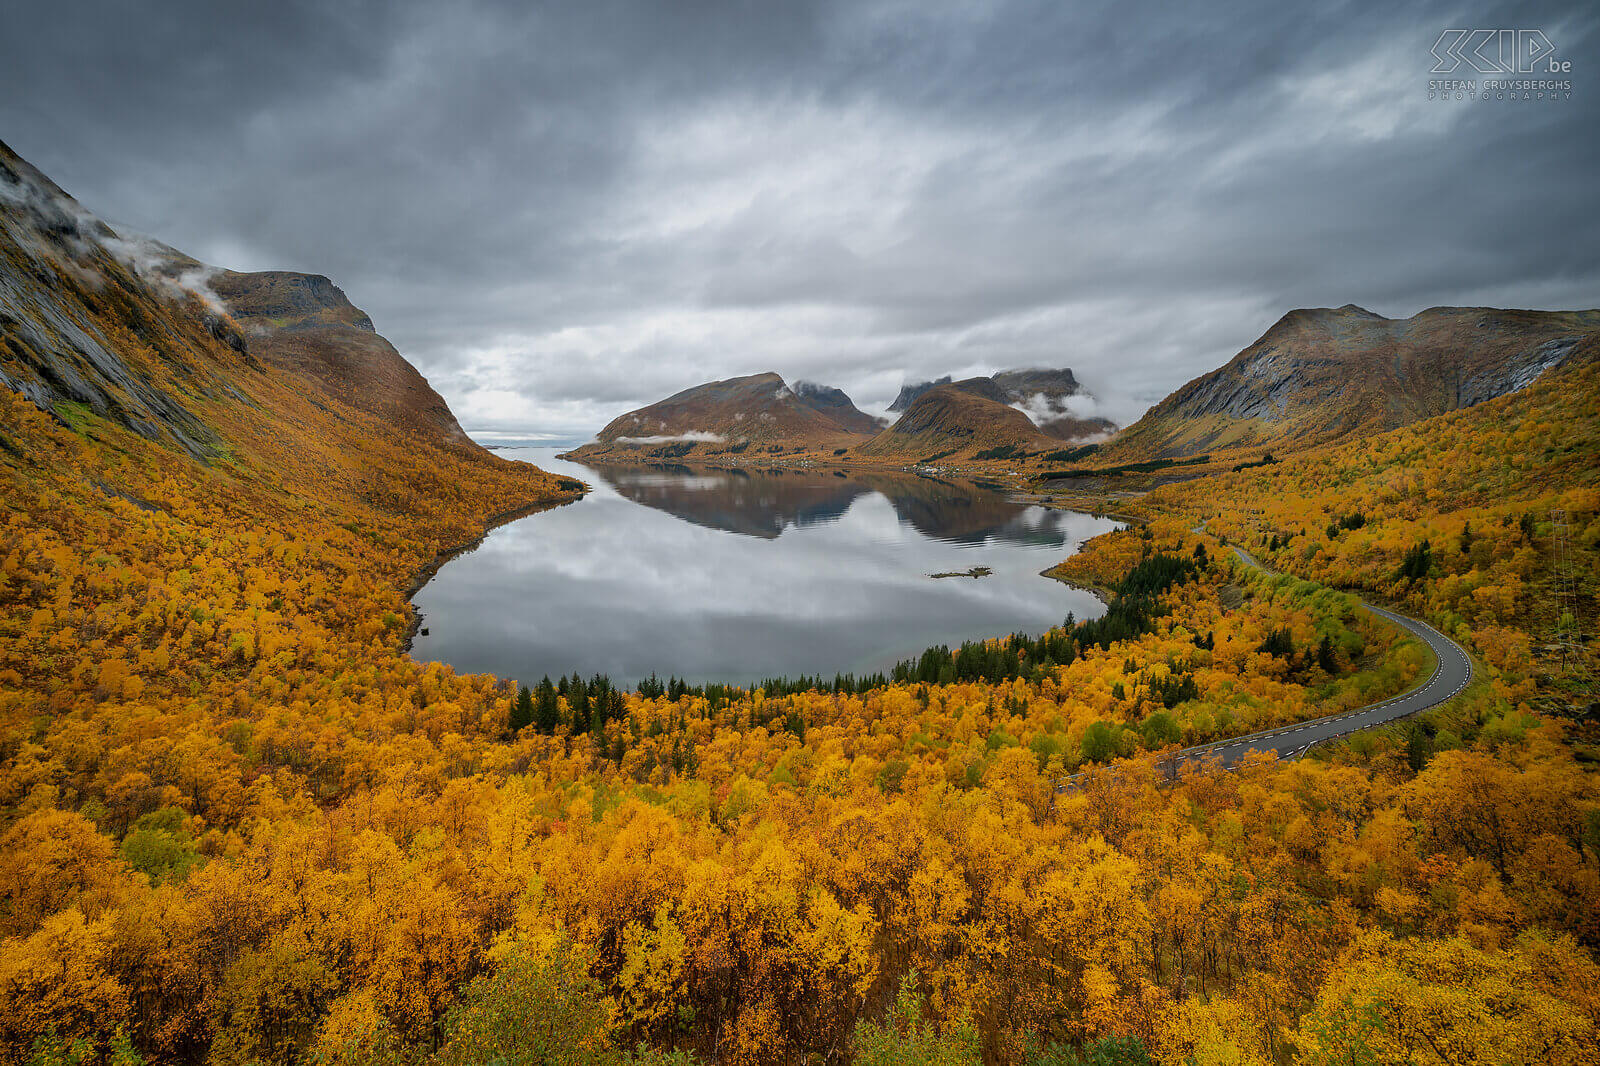 Senja - Bergsbotn Bergsfjord and the surrounding mountains with beautiful autumn colours. This photo was taken from the popular viewing platform in Bergsbotn on the island of Senja in Norway. Stefan Cruysberghs